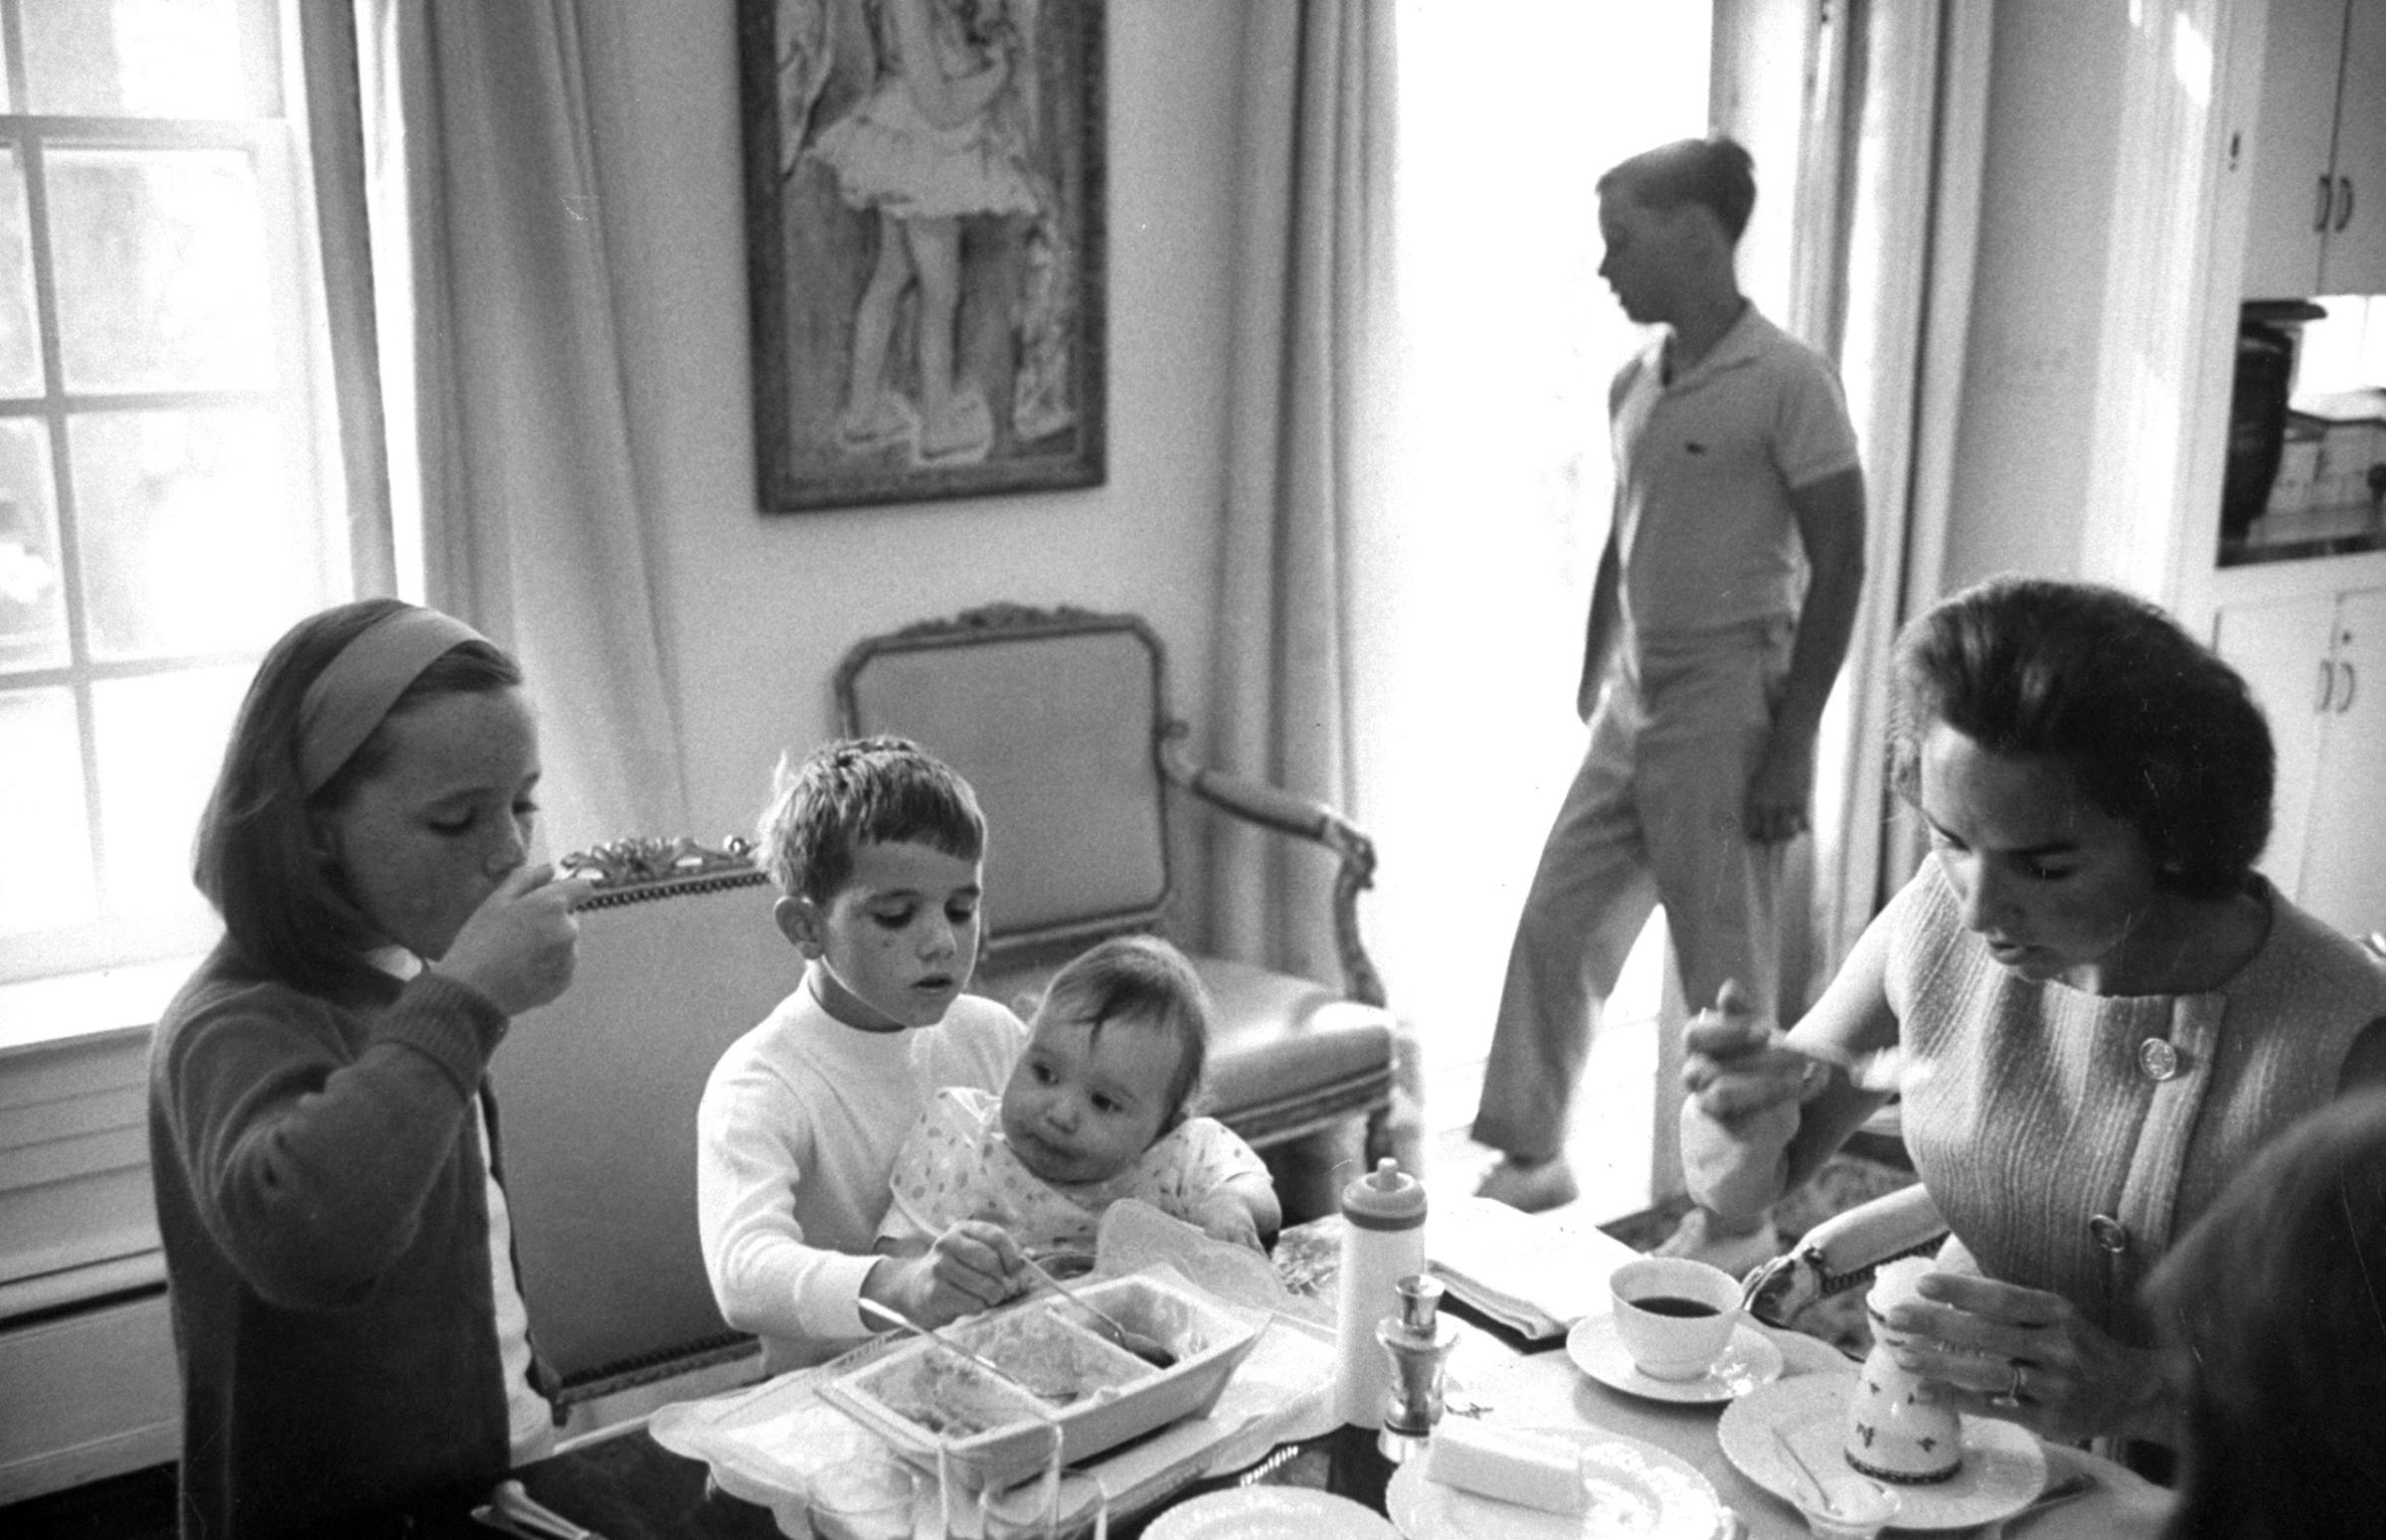 Ethel finishes her meal as Michael, 6, holds Christopher, one, in lap and 7-year-old Courtney tempts baby by testing his food. Joseph, 11, looks out window.